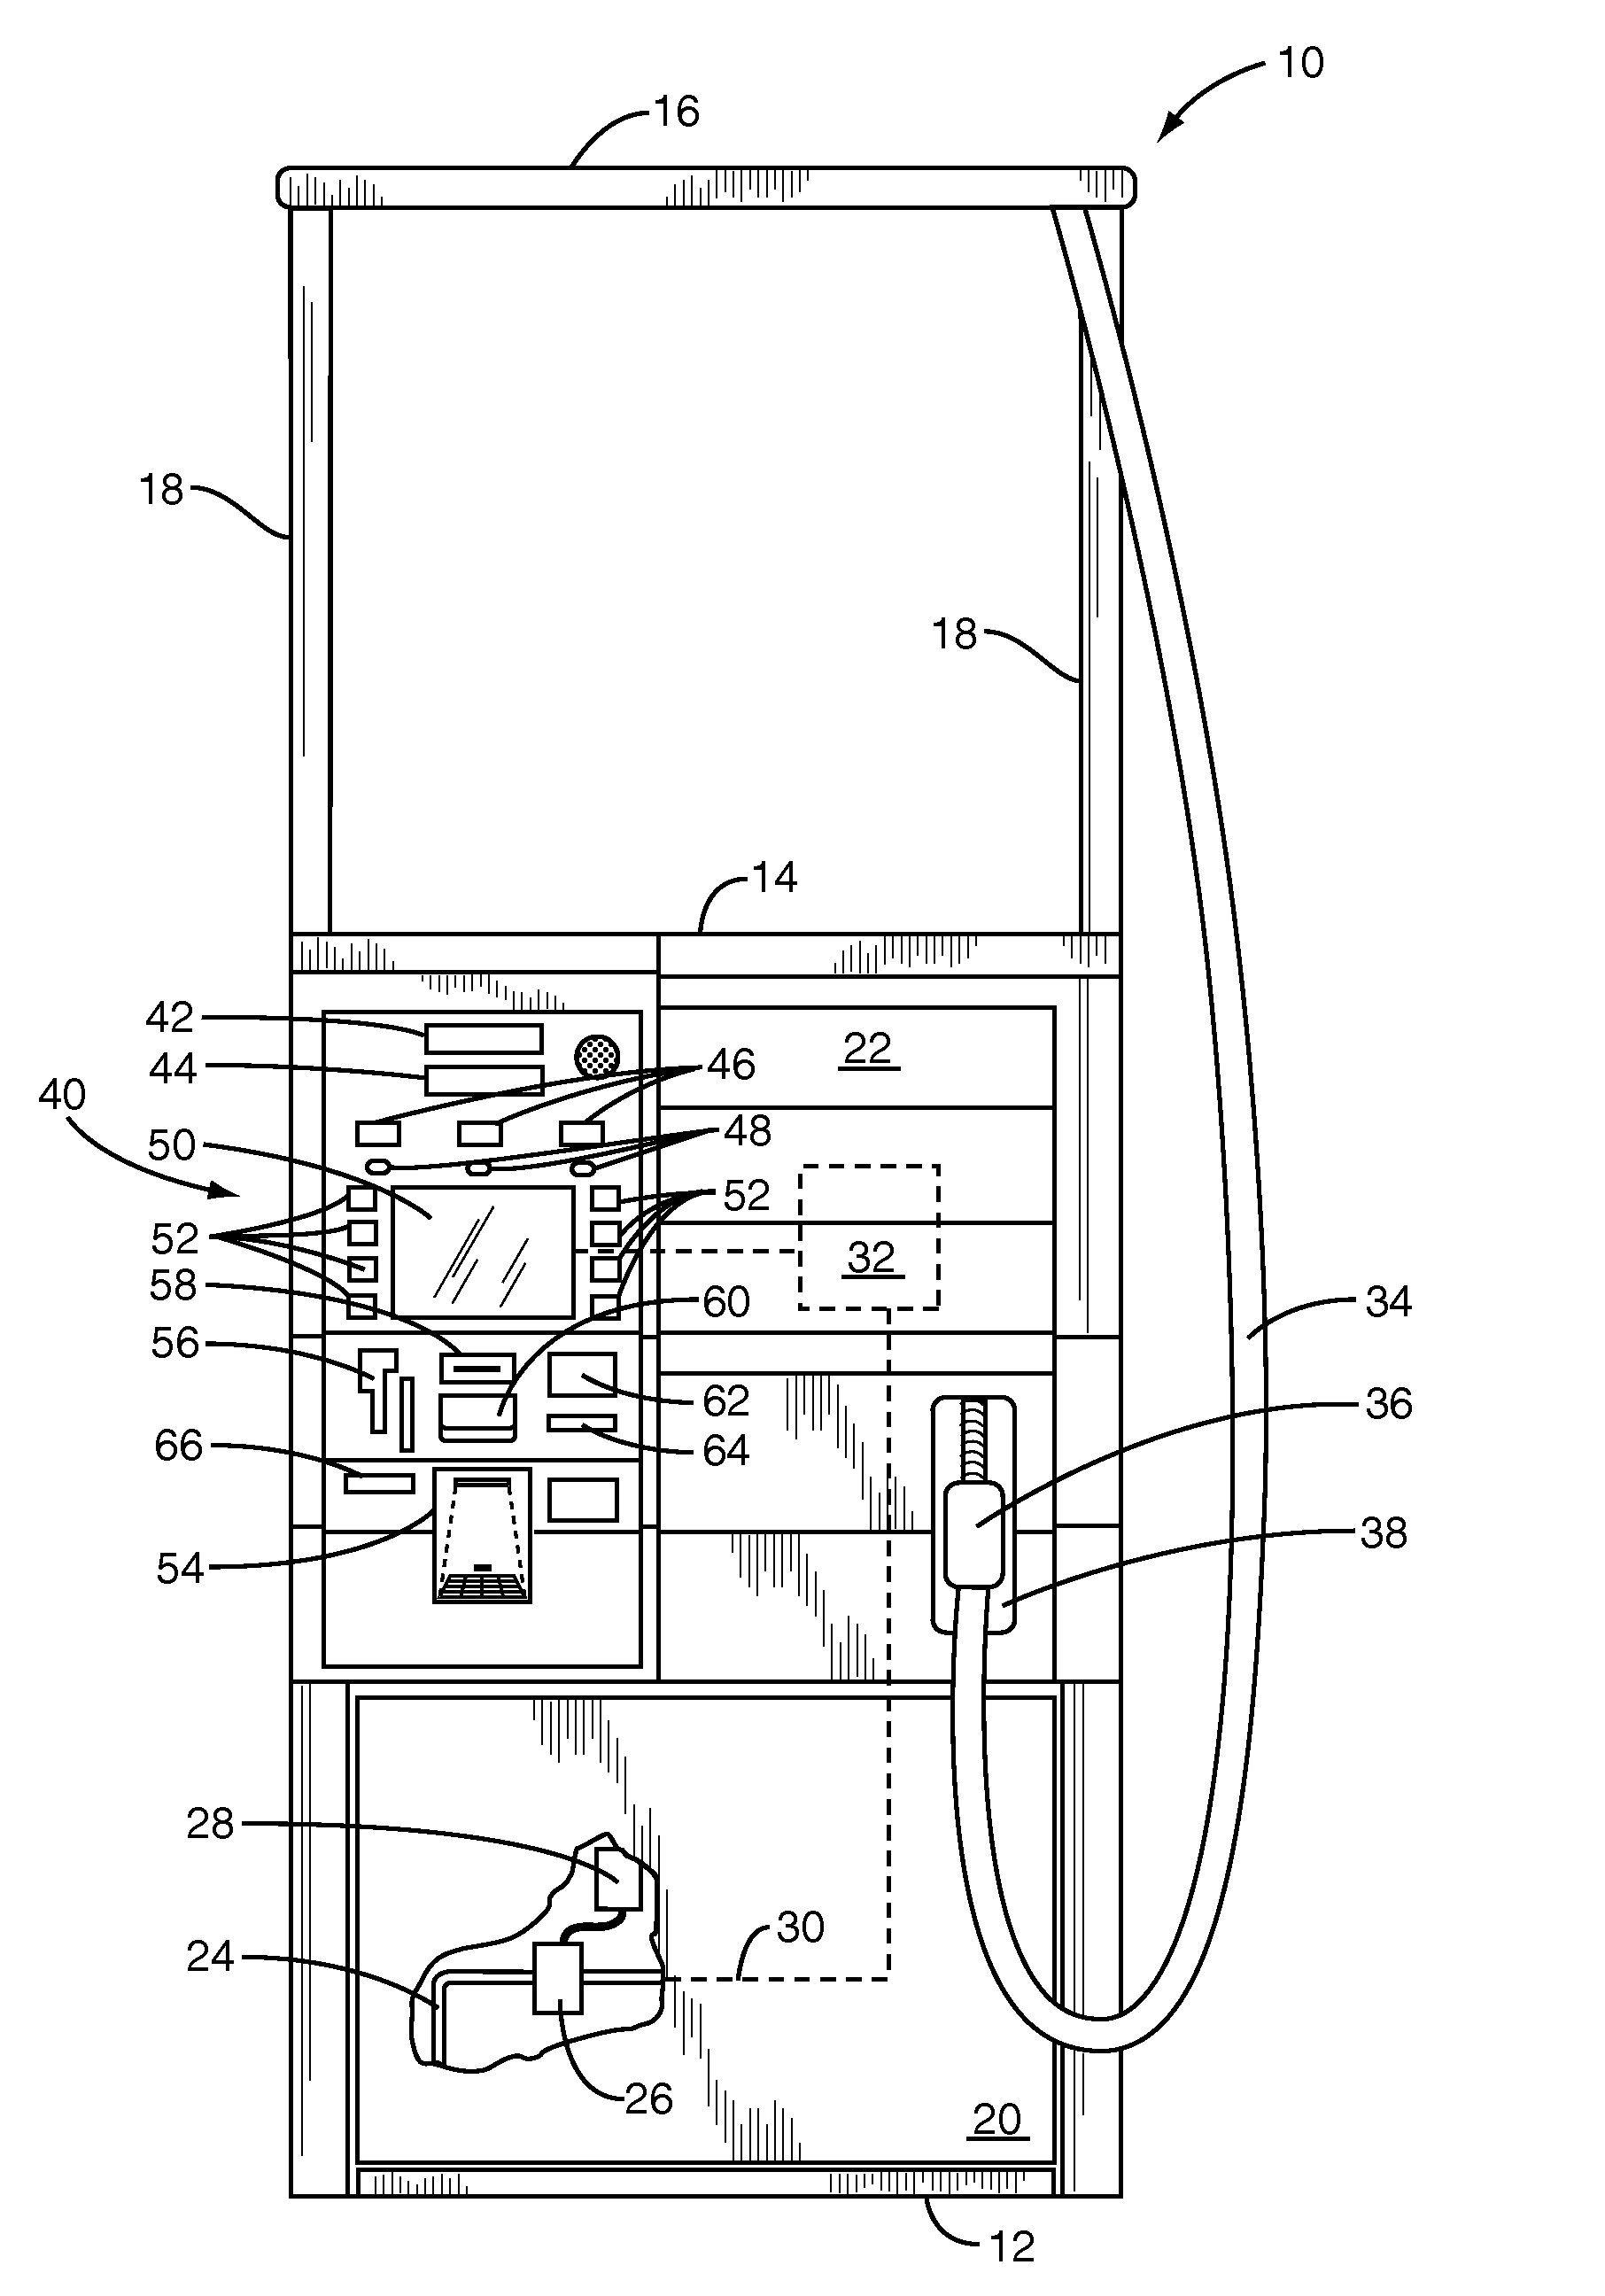 Projected user input device for a fuel dispenser and related applications